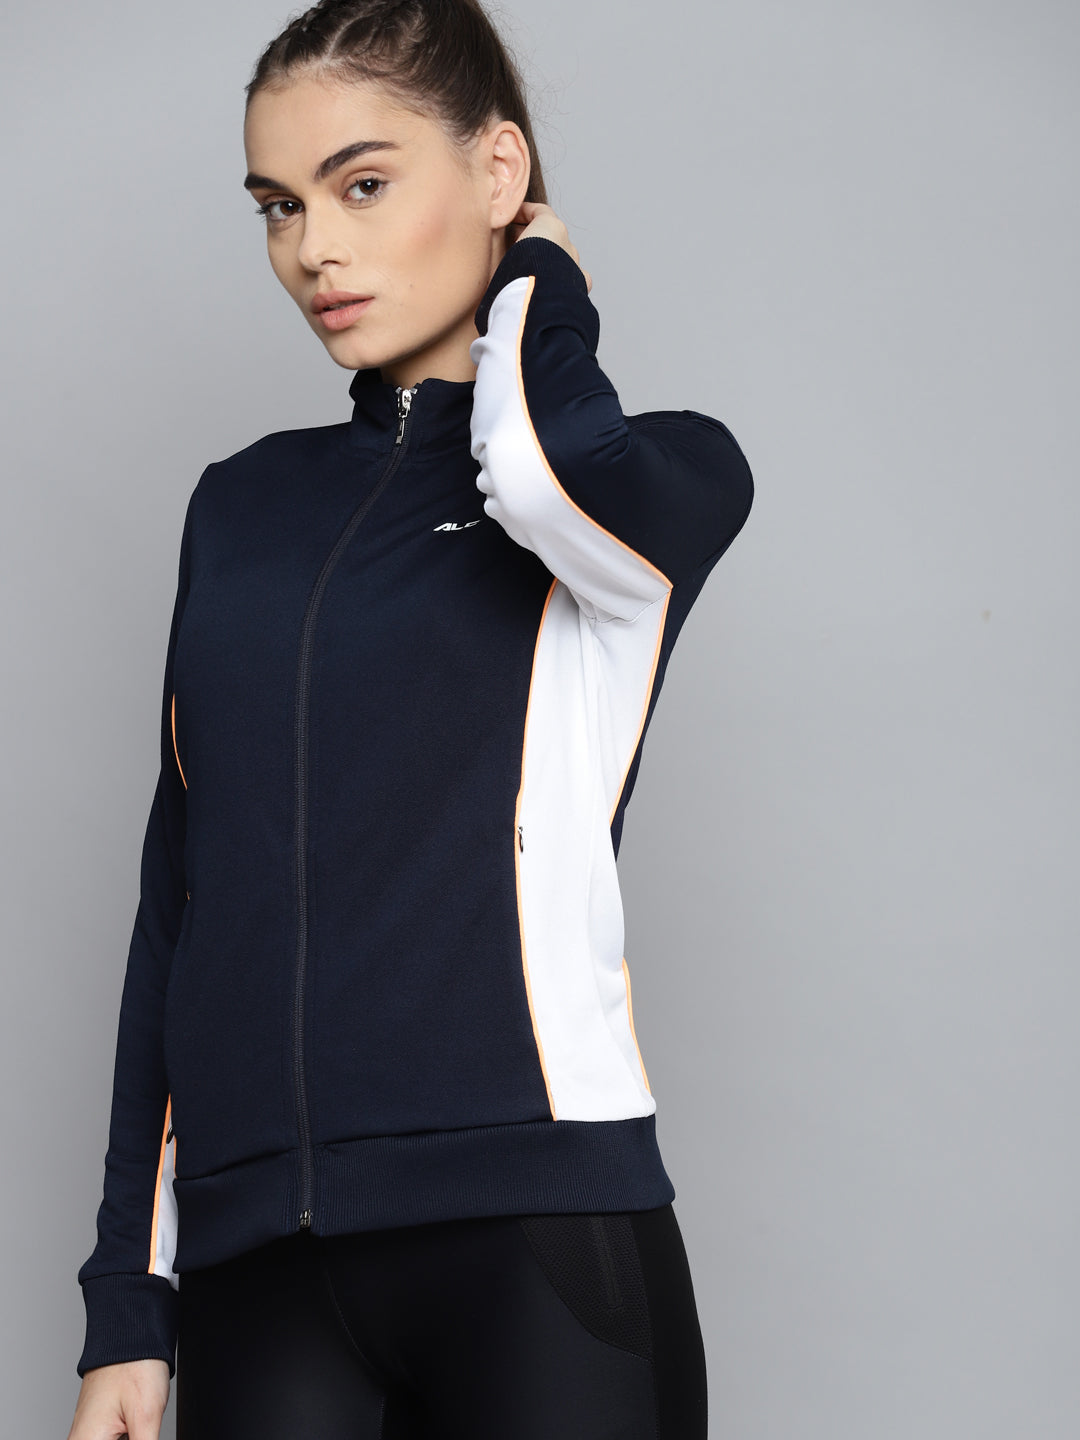 Alcis Women Solid Navy Blue Jackets